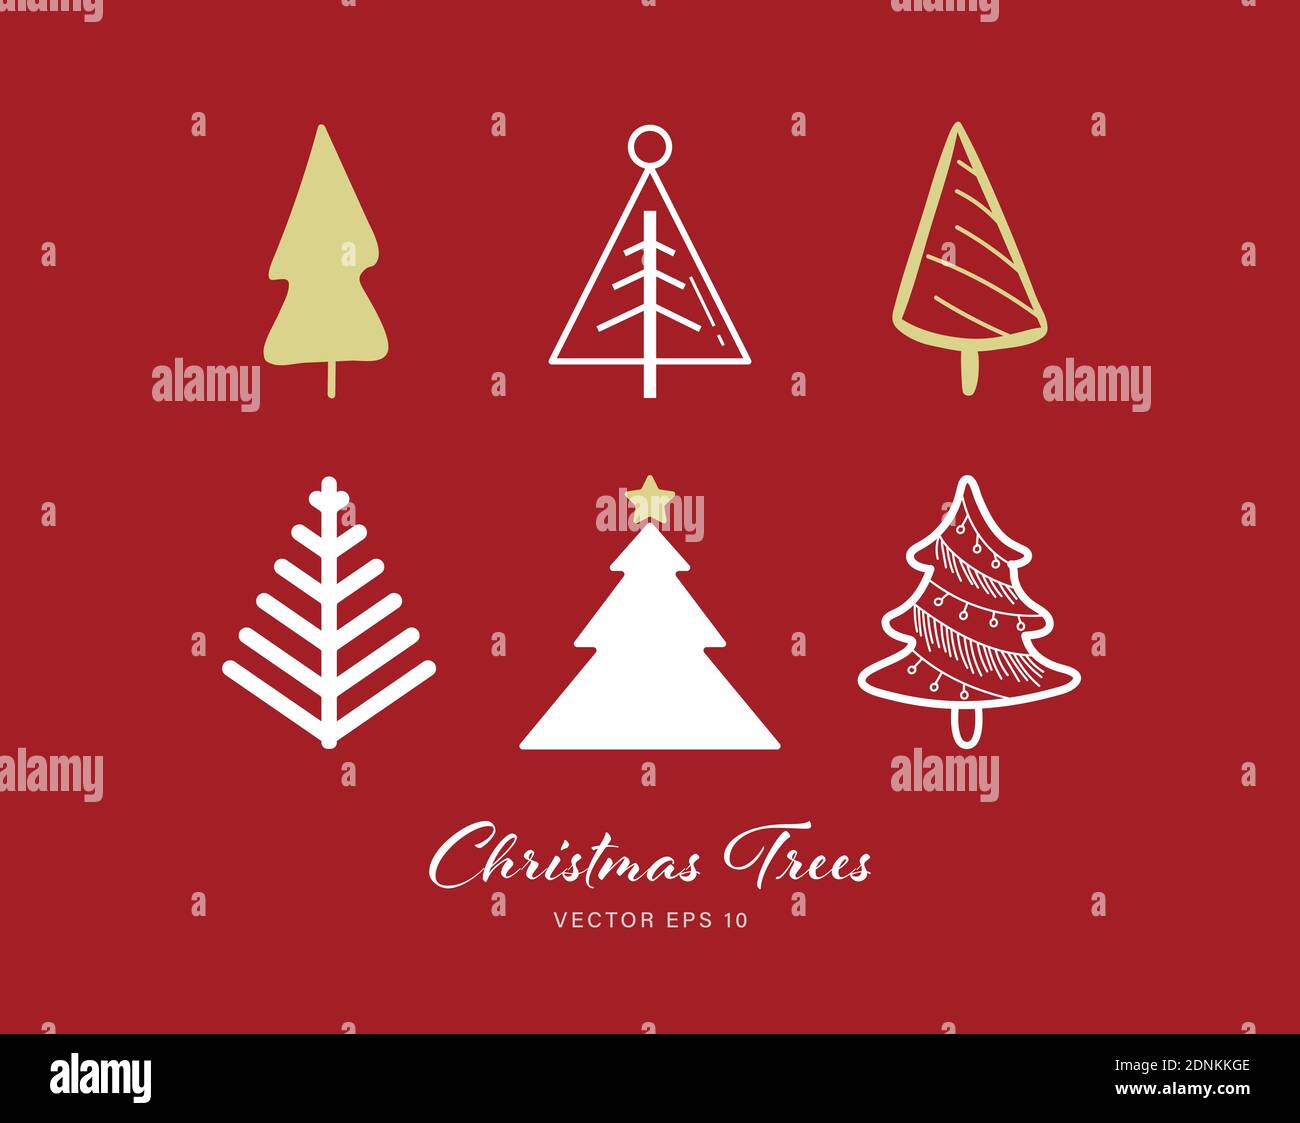 Christmas tree icon set of 6 designs on red color background Stock Vector